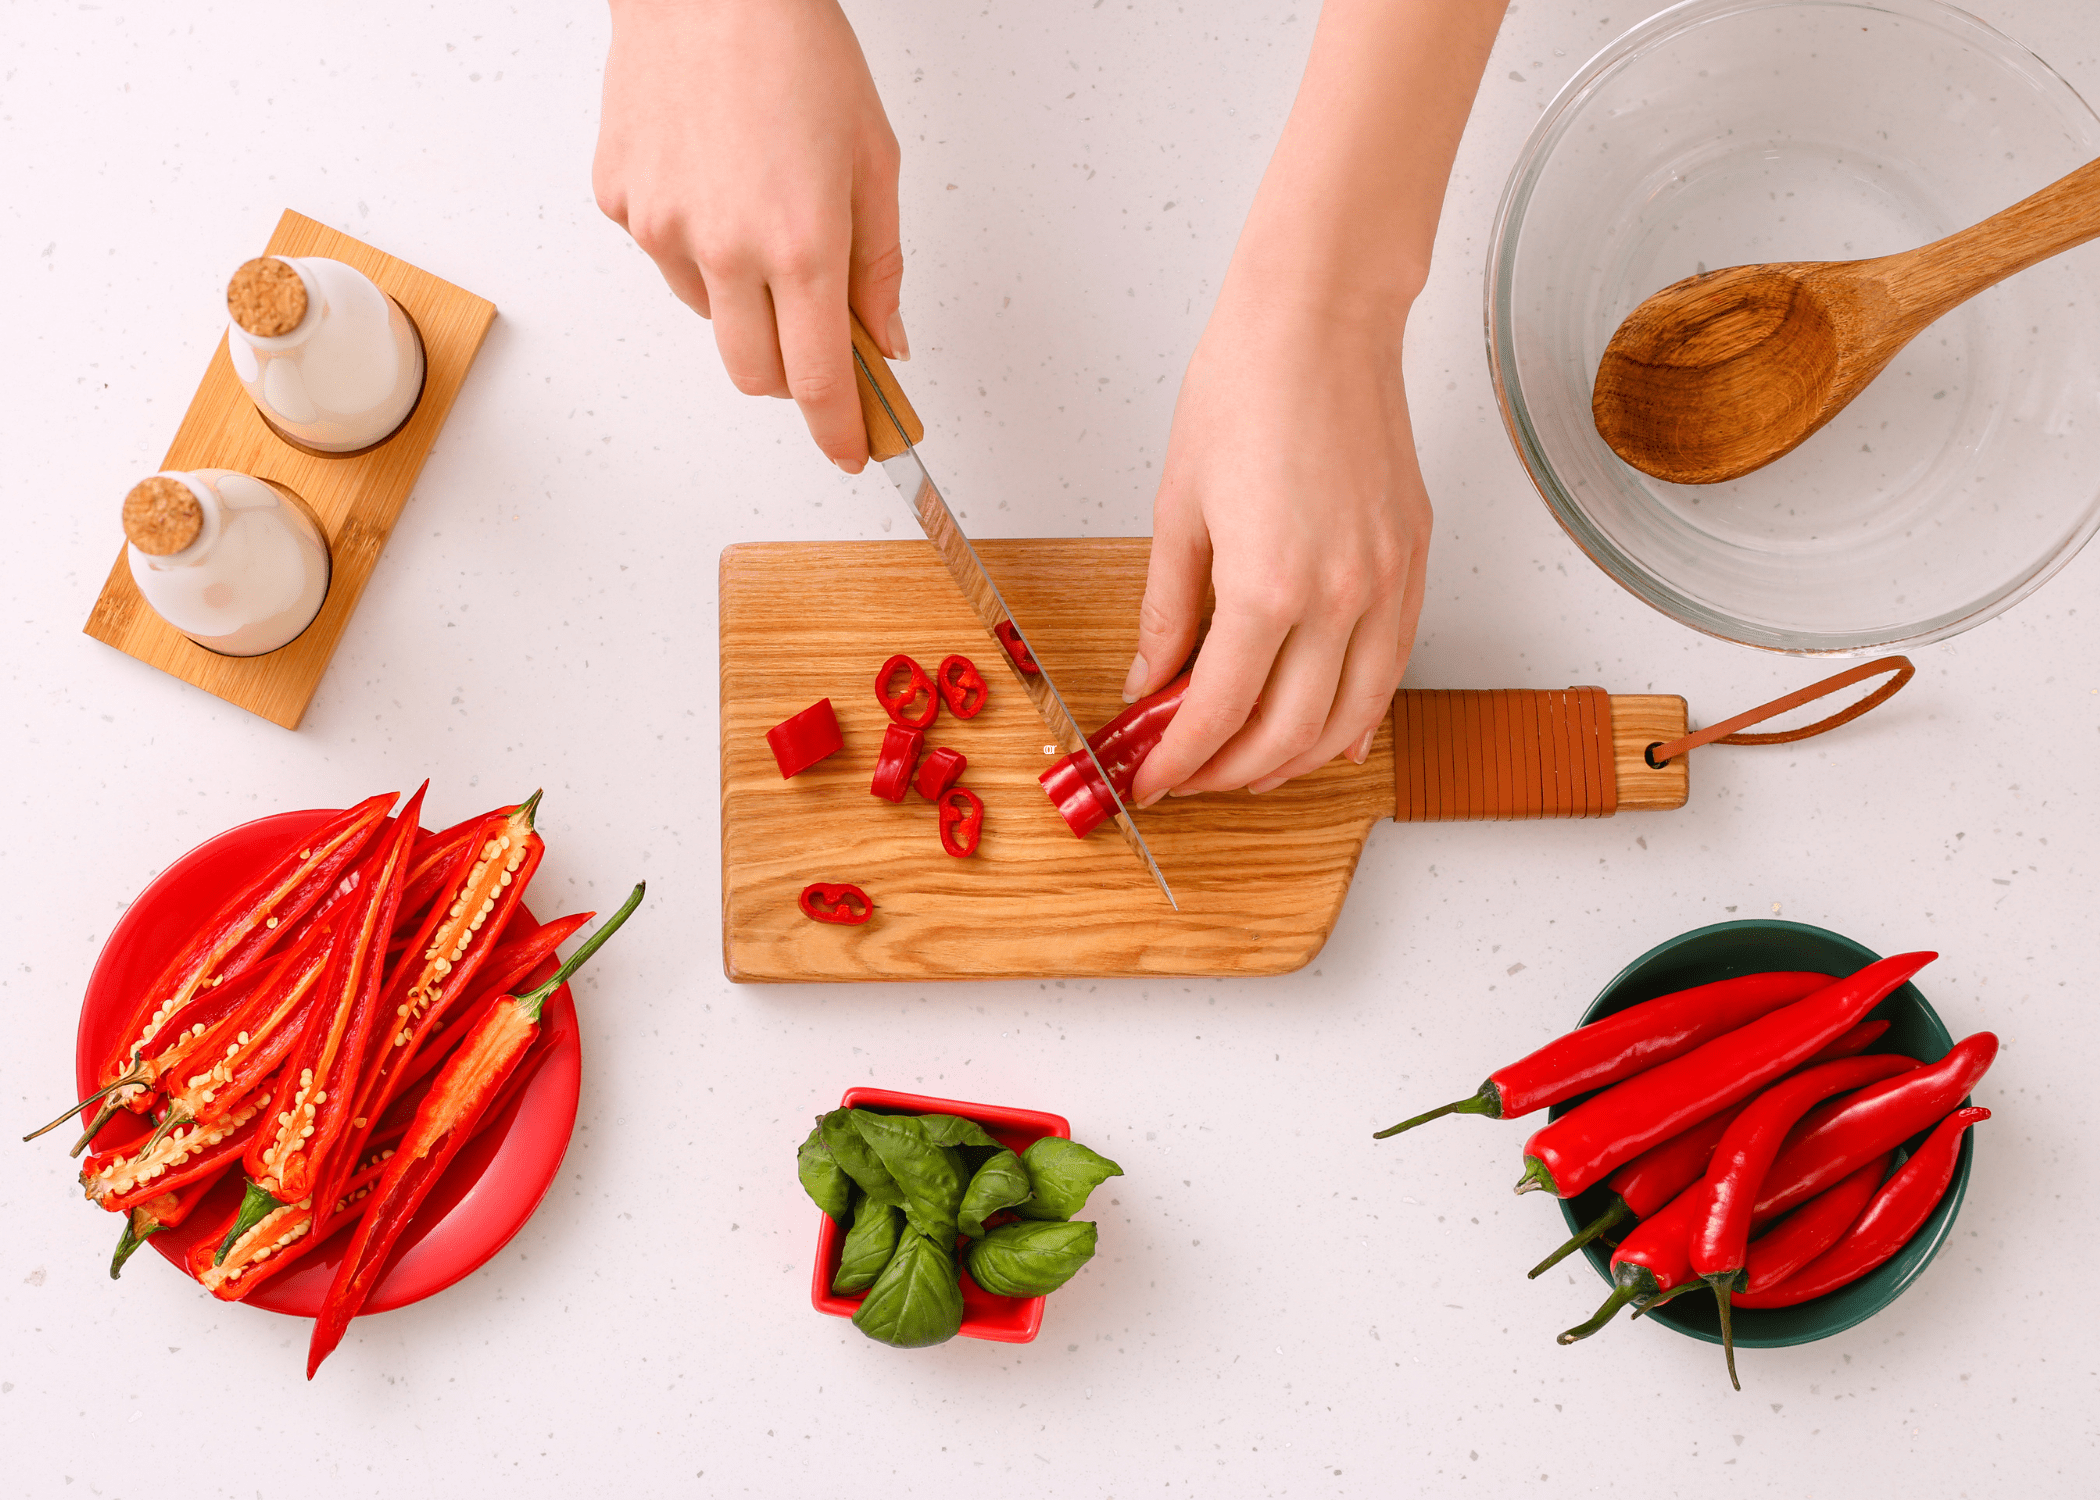 cutting red chili peppers on wood cutting board